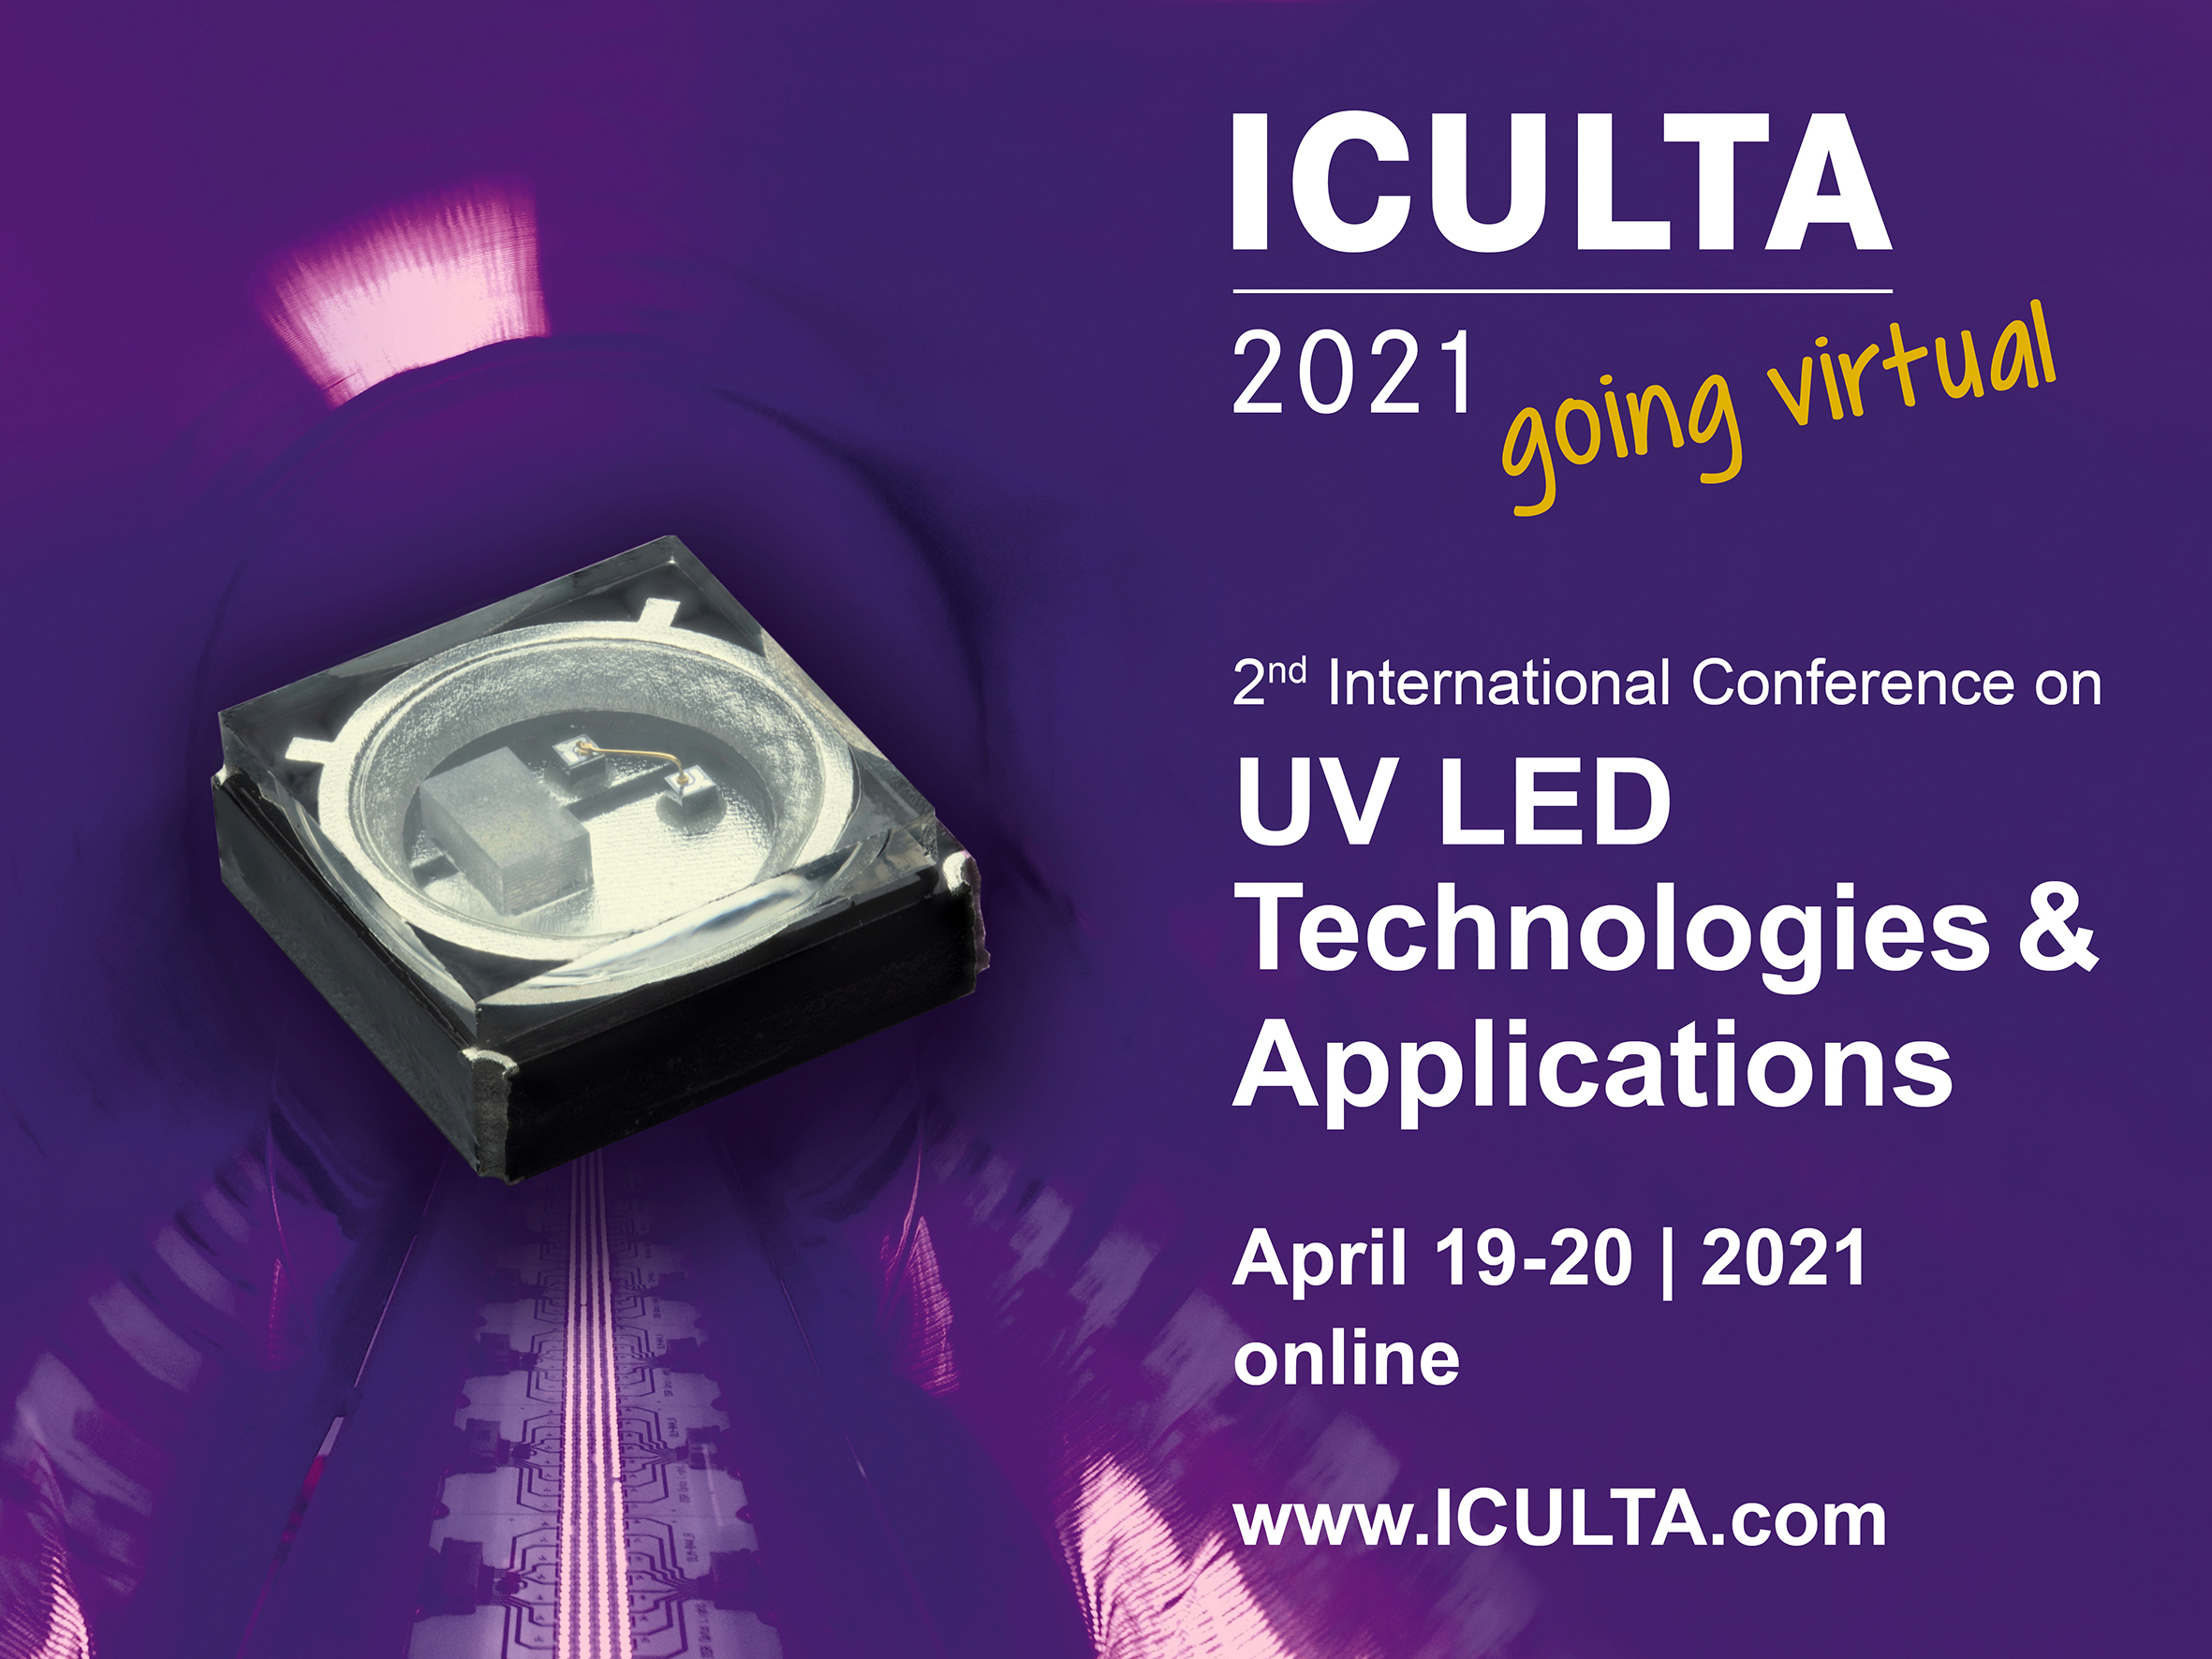 ICULTA - International Conference on UV LED Technologies & Applications